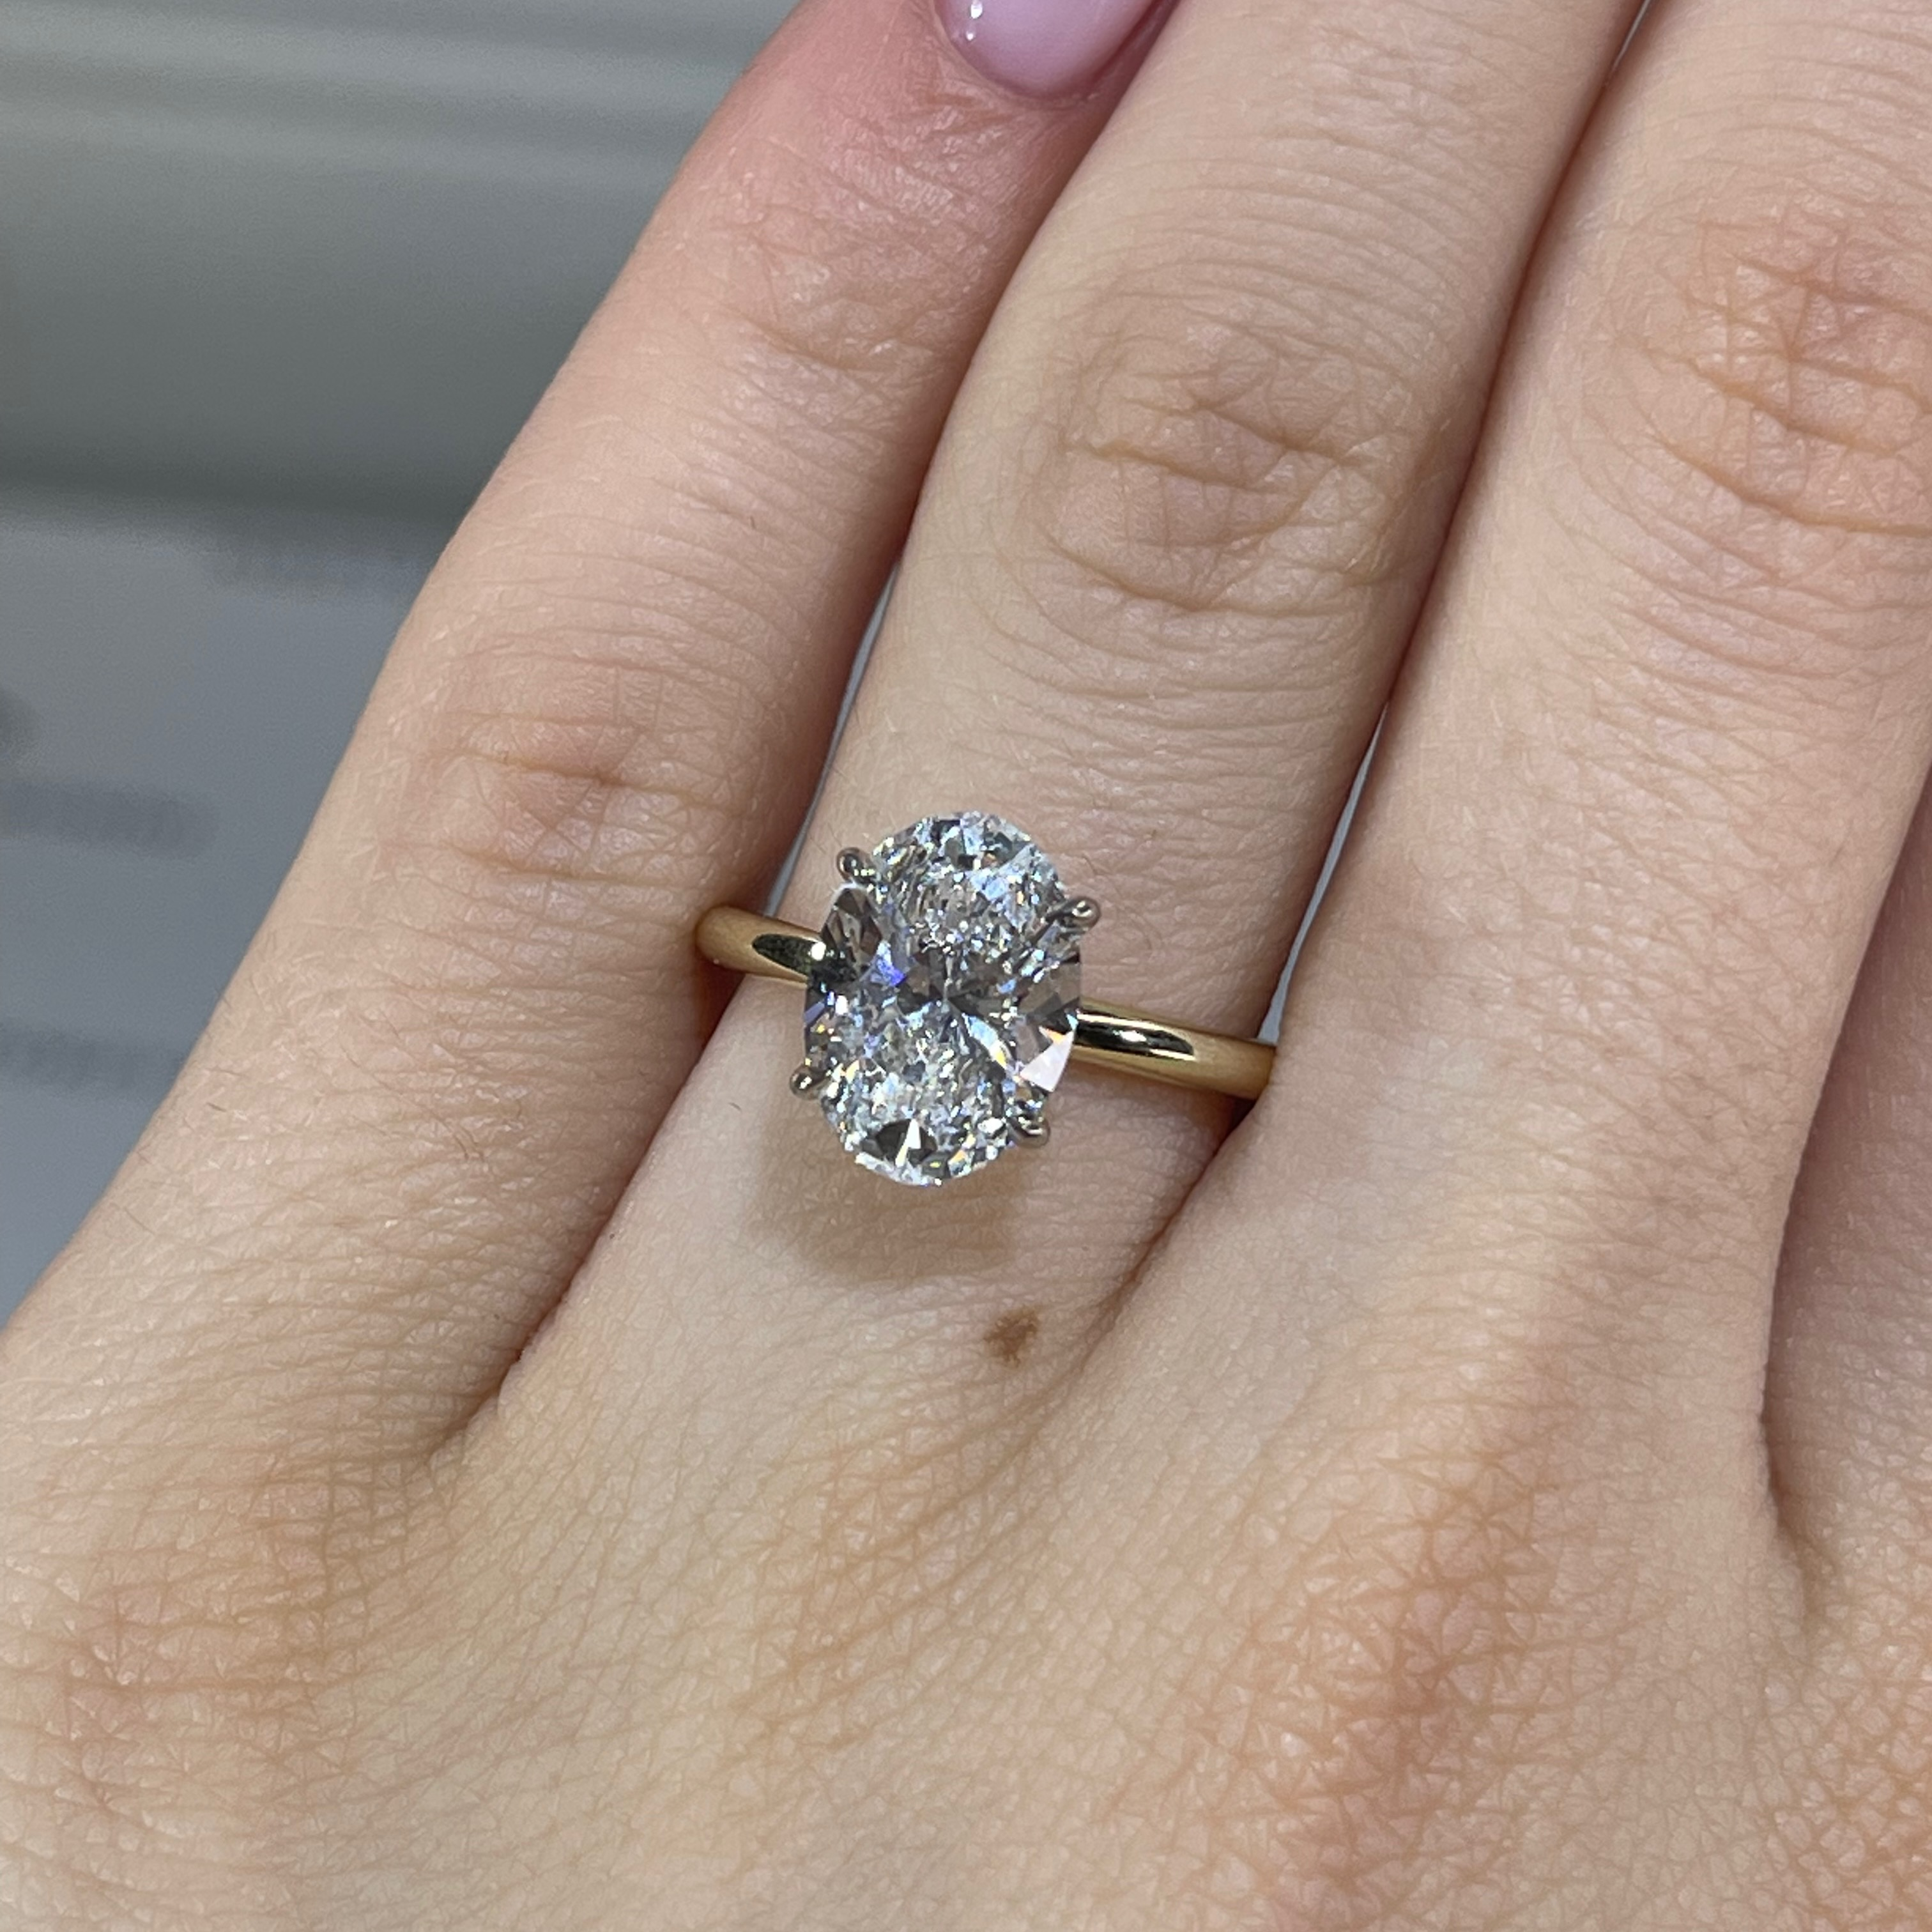 How to Clean Your Diamond Engagement Ring - Bespoke Diamonds